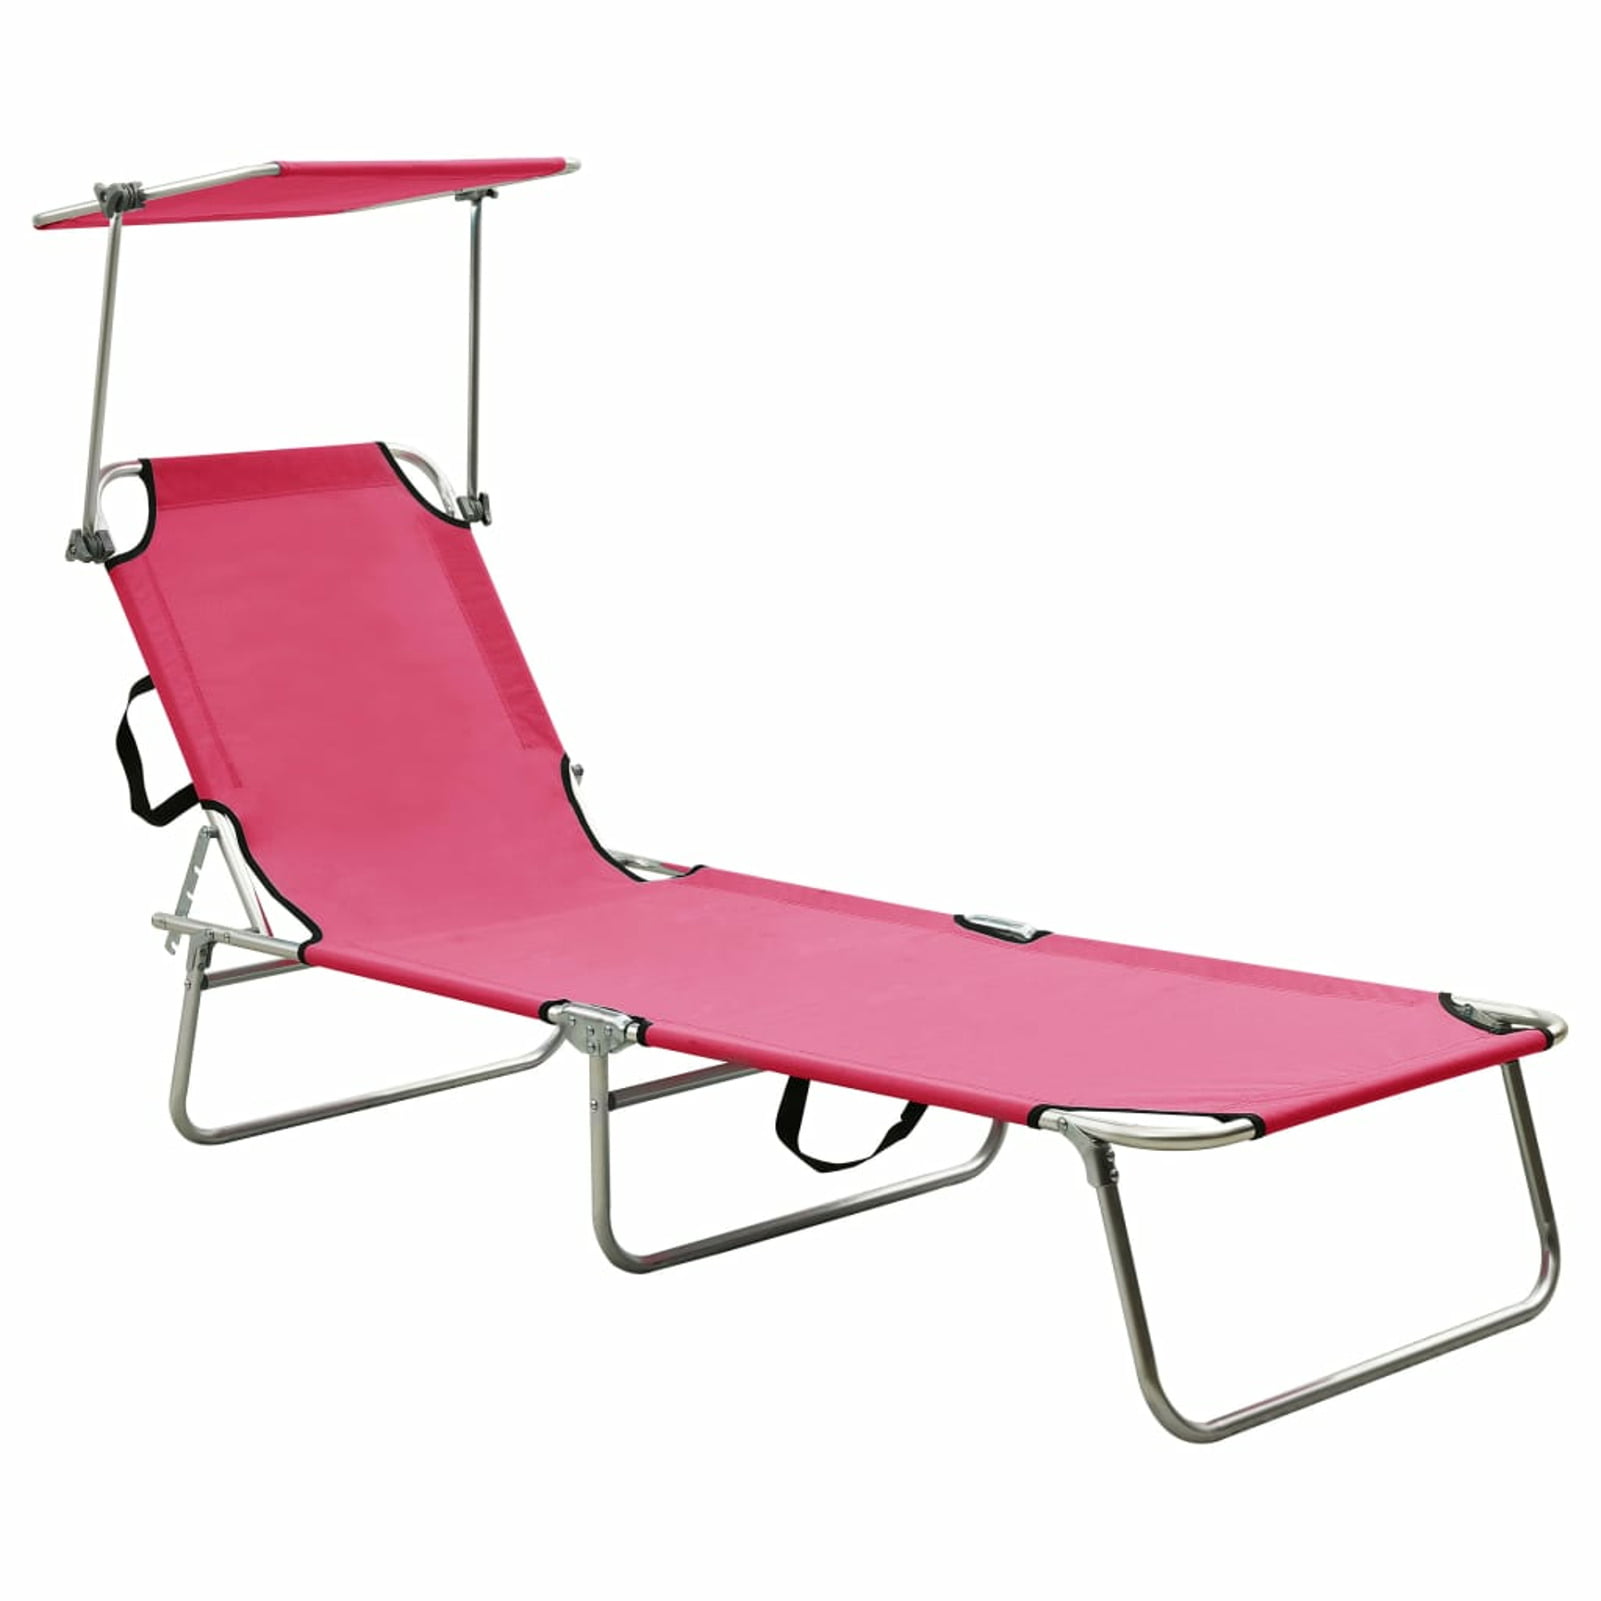 Details about   Folding Sun Lounger with Canopy Steel Reclining Chair Beach Sunbed Outdoor Patio 